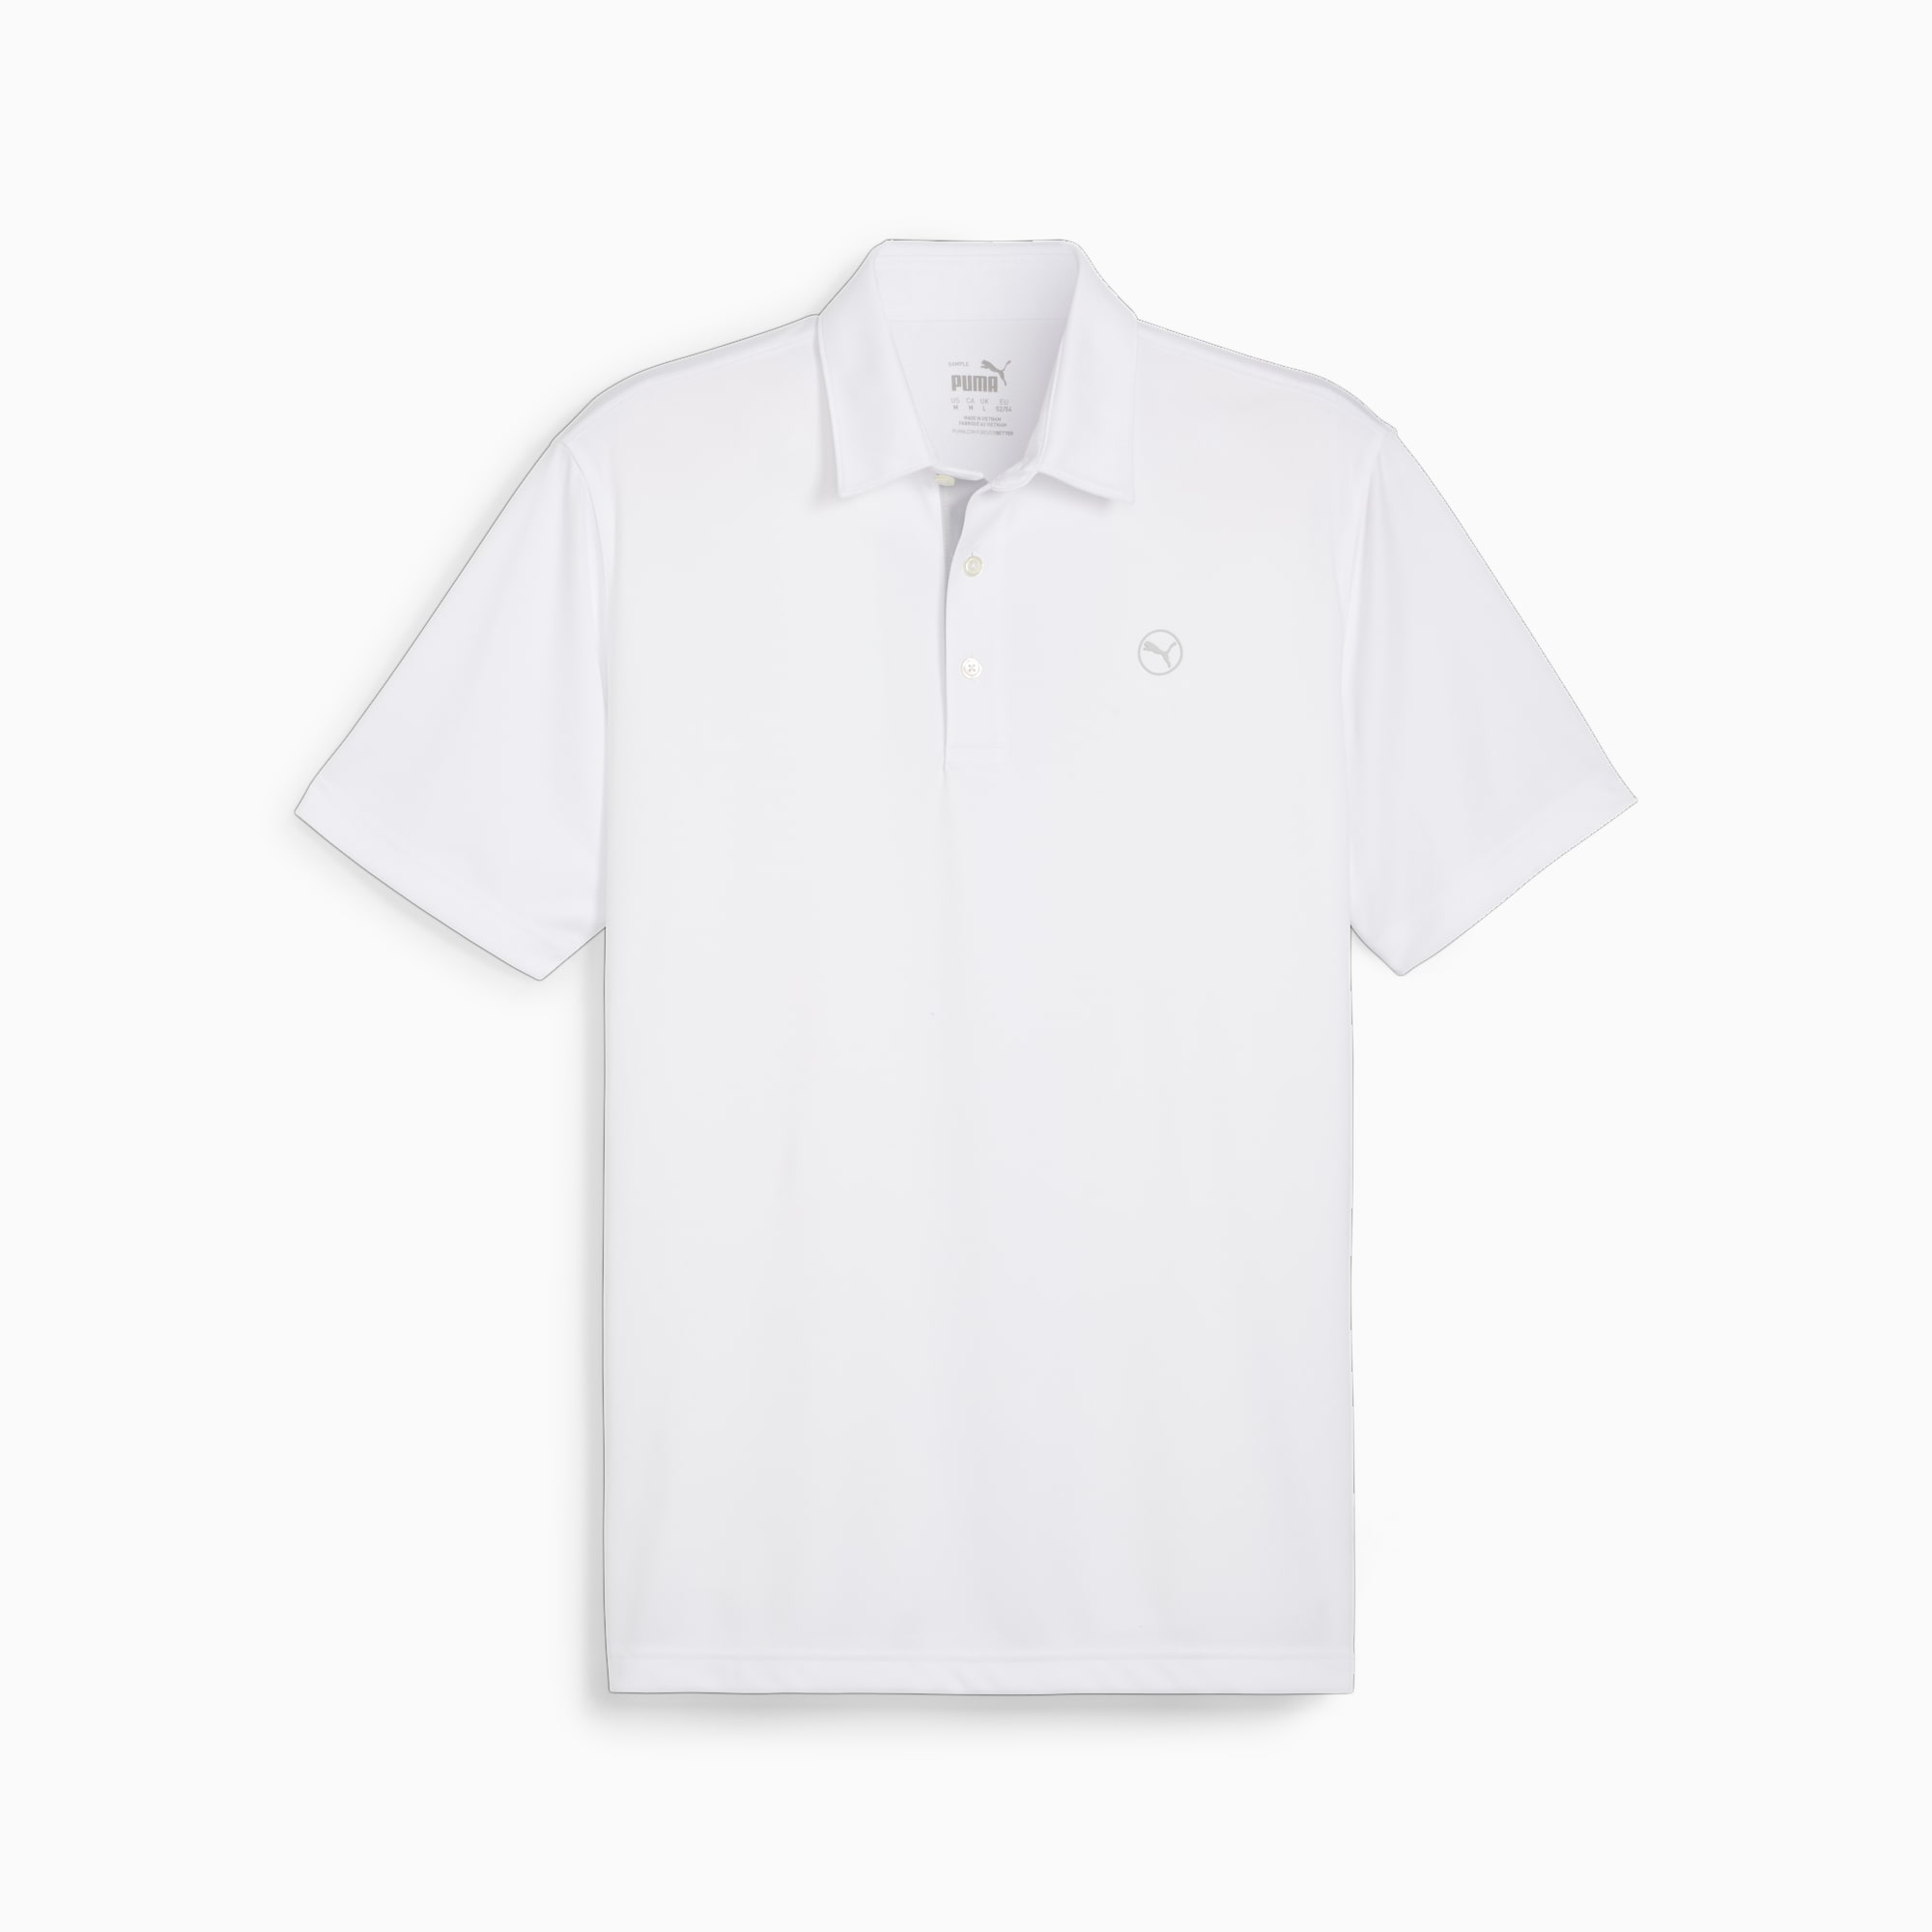 PUMA Pure Solid Men's Golf Polo Shirt, White Glow, Size S, Clothing